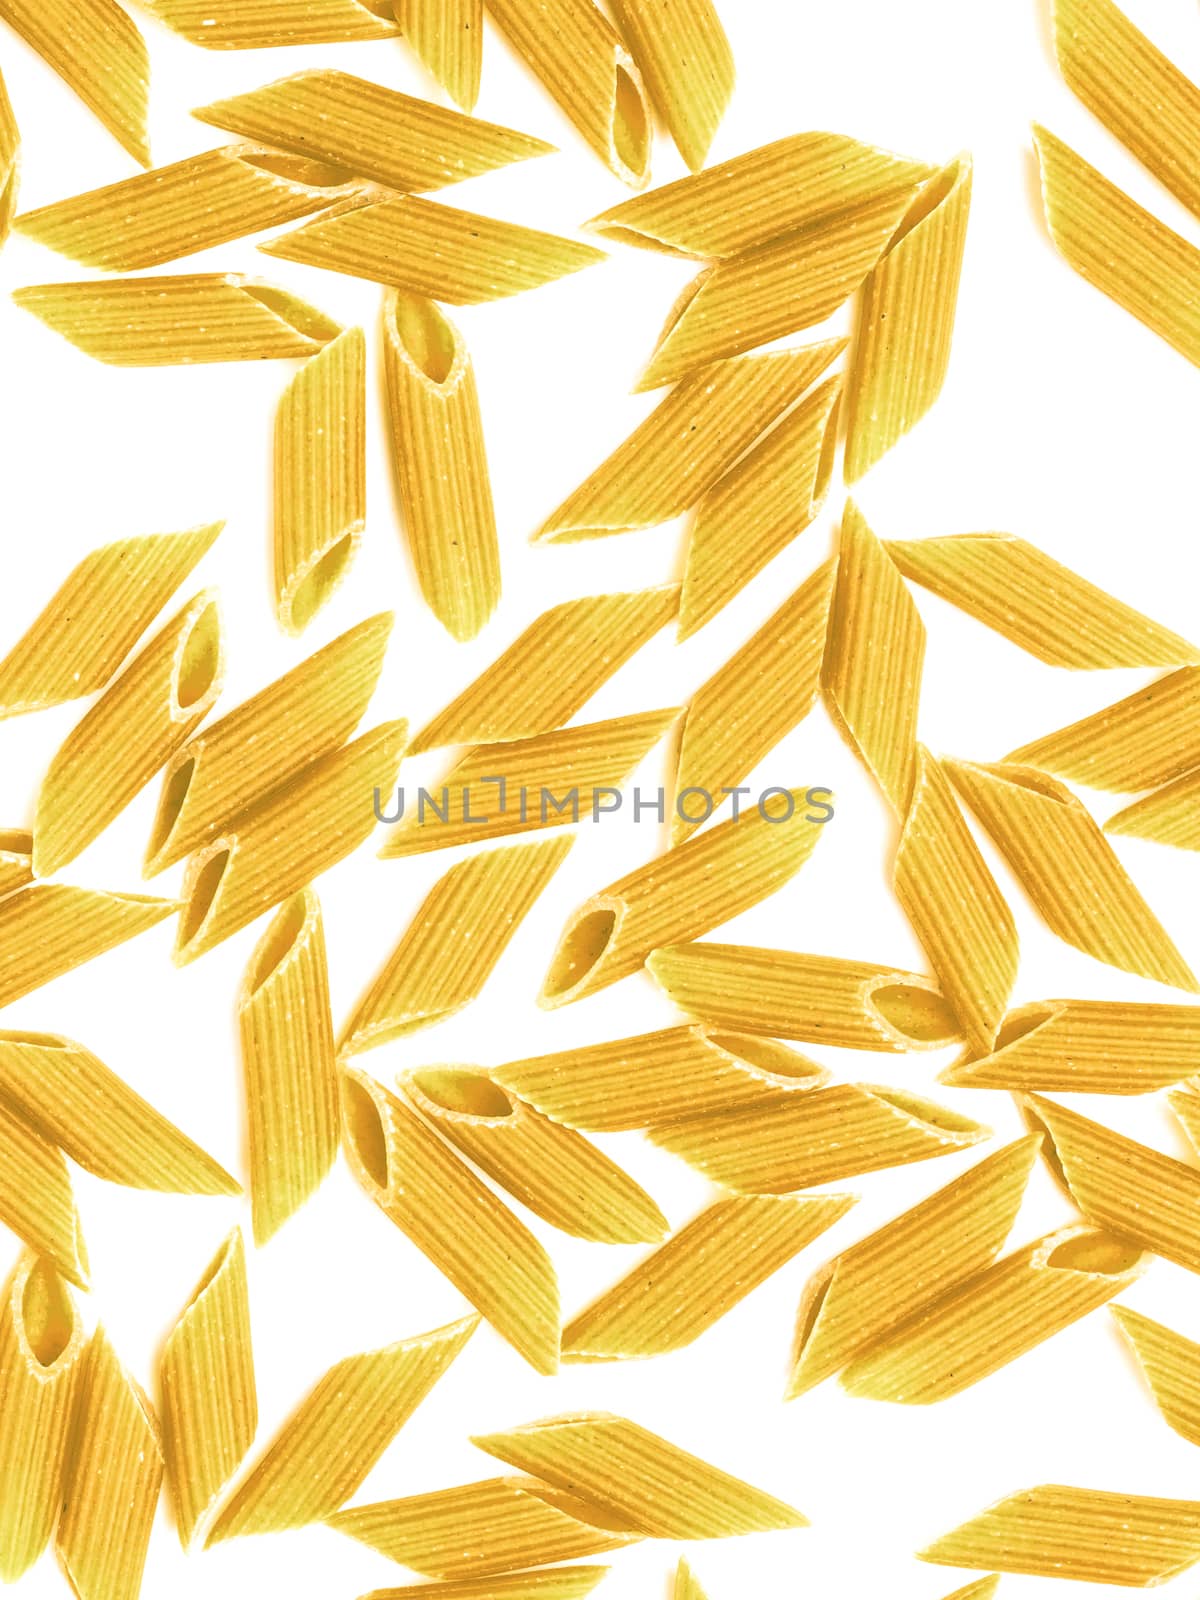 Penne pasta isolated over white. Top view.